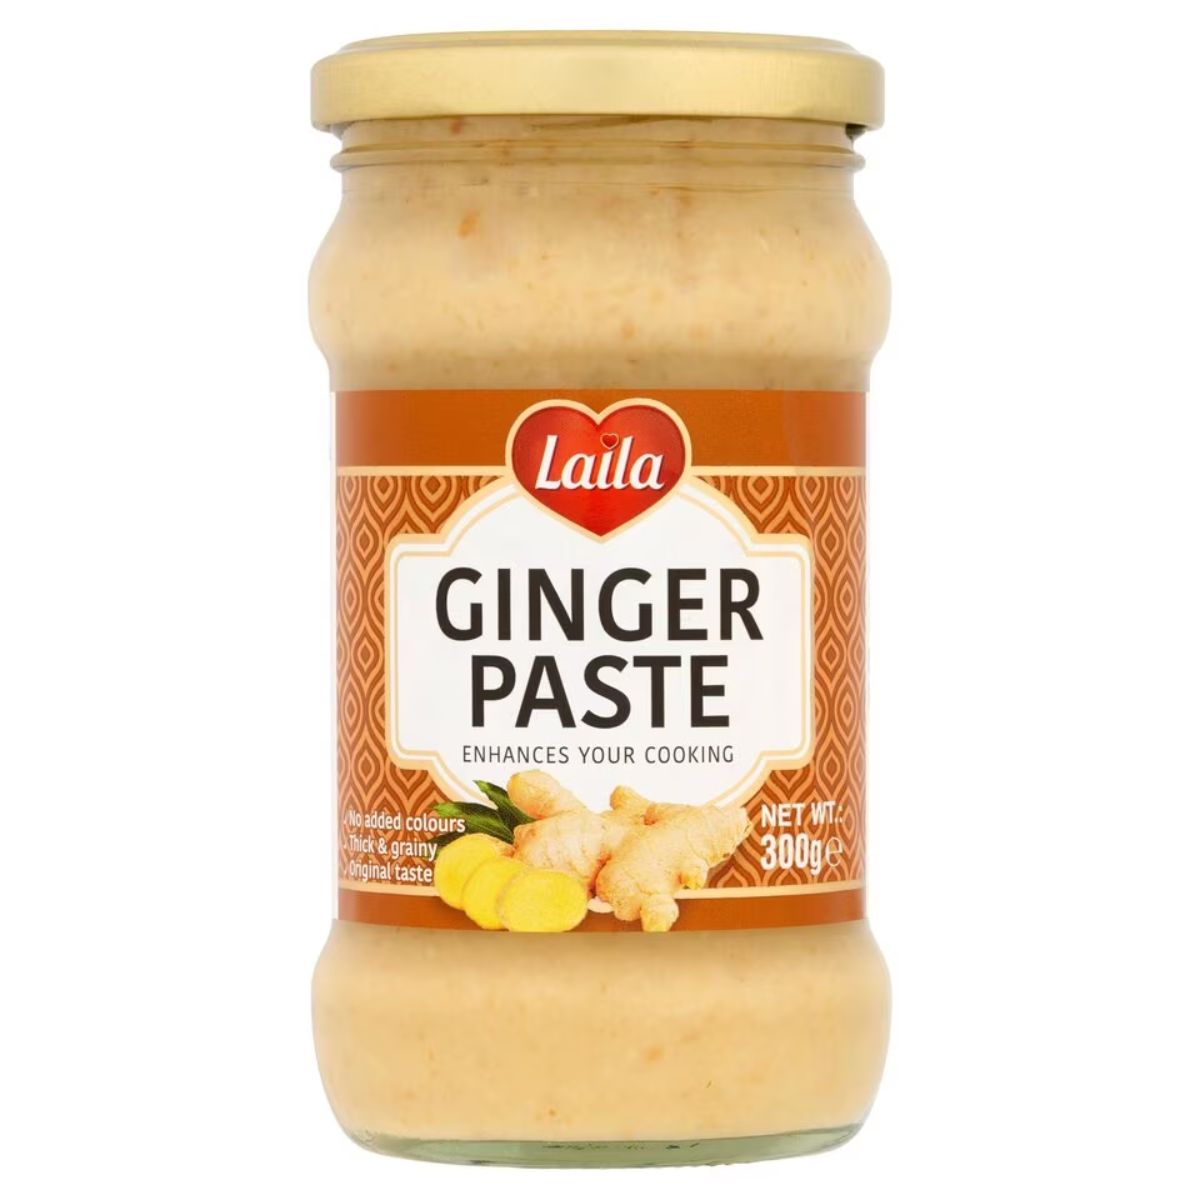 A jar of Laila - Ginger Paste - 300g on a white background.